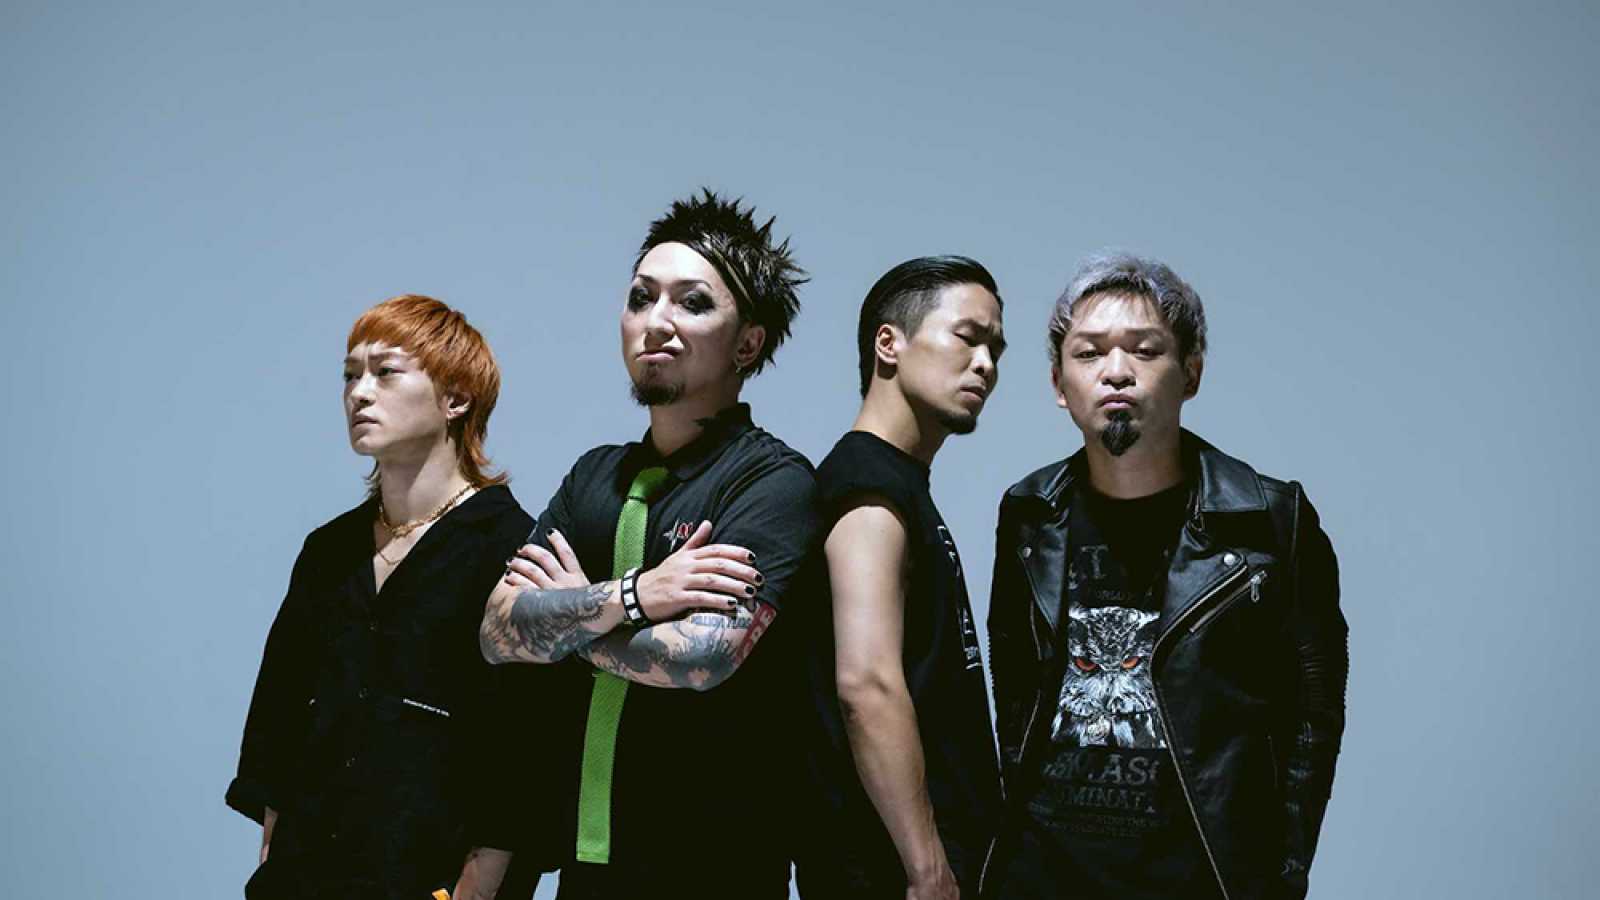 SiM to Perform New “Attack on Titan” Theme Song © SiM. All rights reserved.